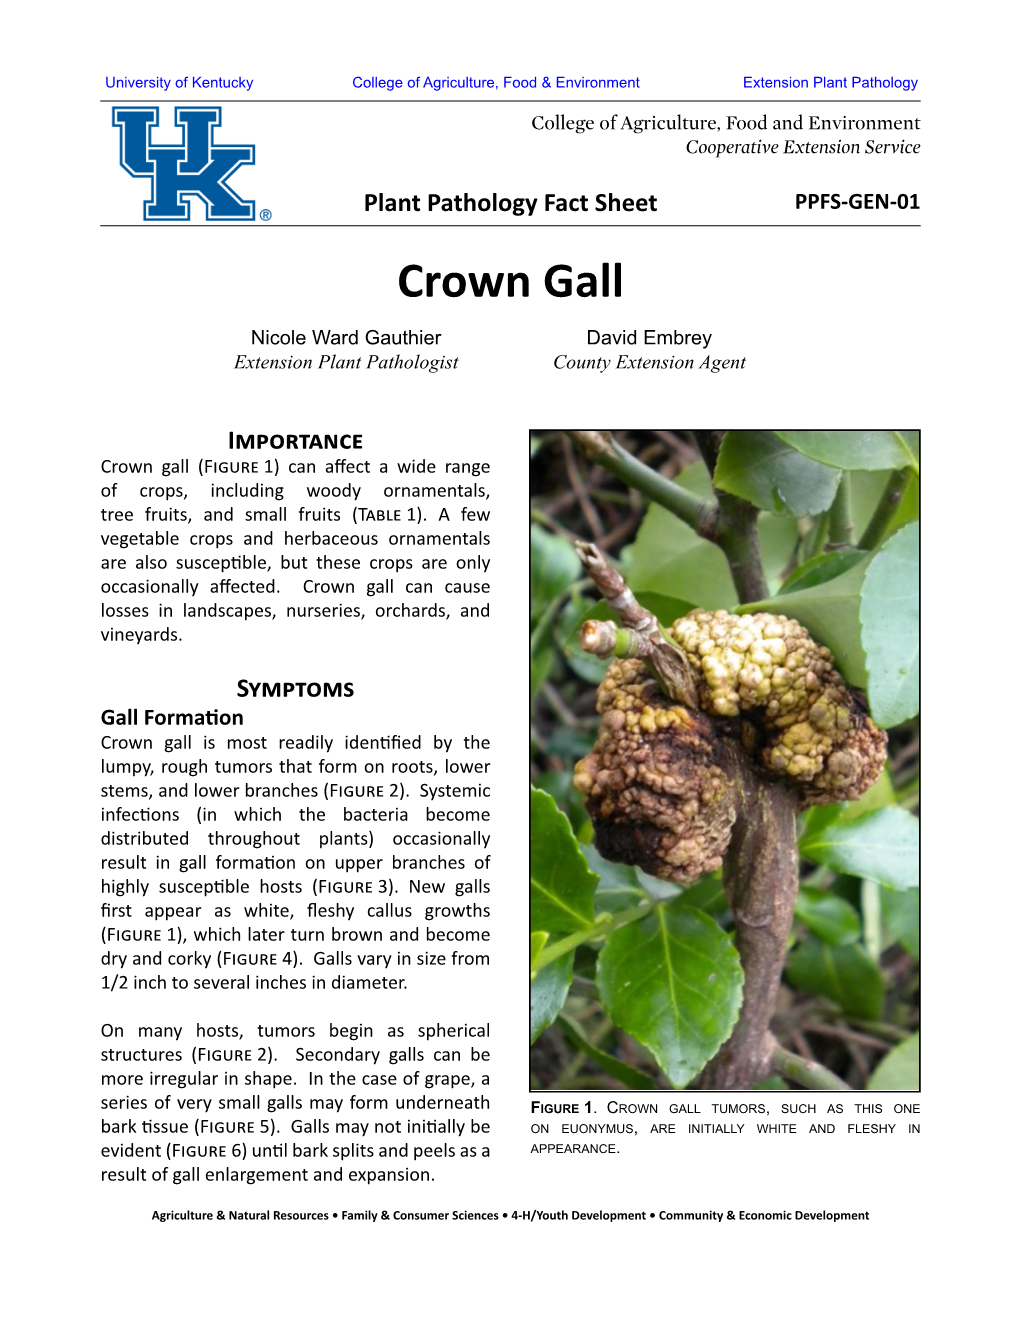 Crown Gall Nicole Ward Gauthier David Embrey Extension Plant Pathologist County Extension Agent